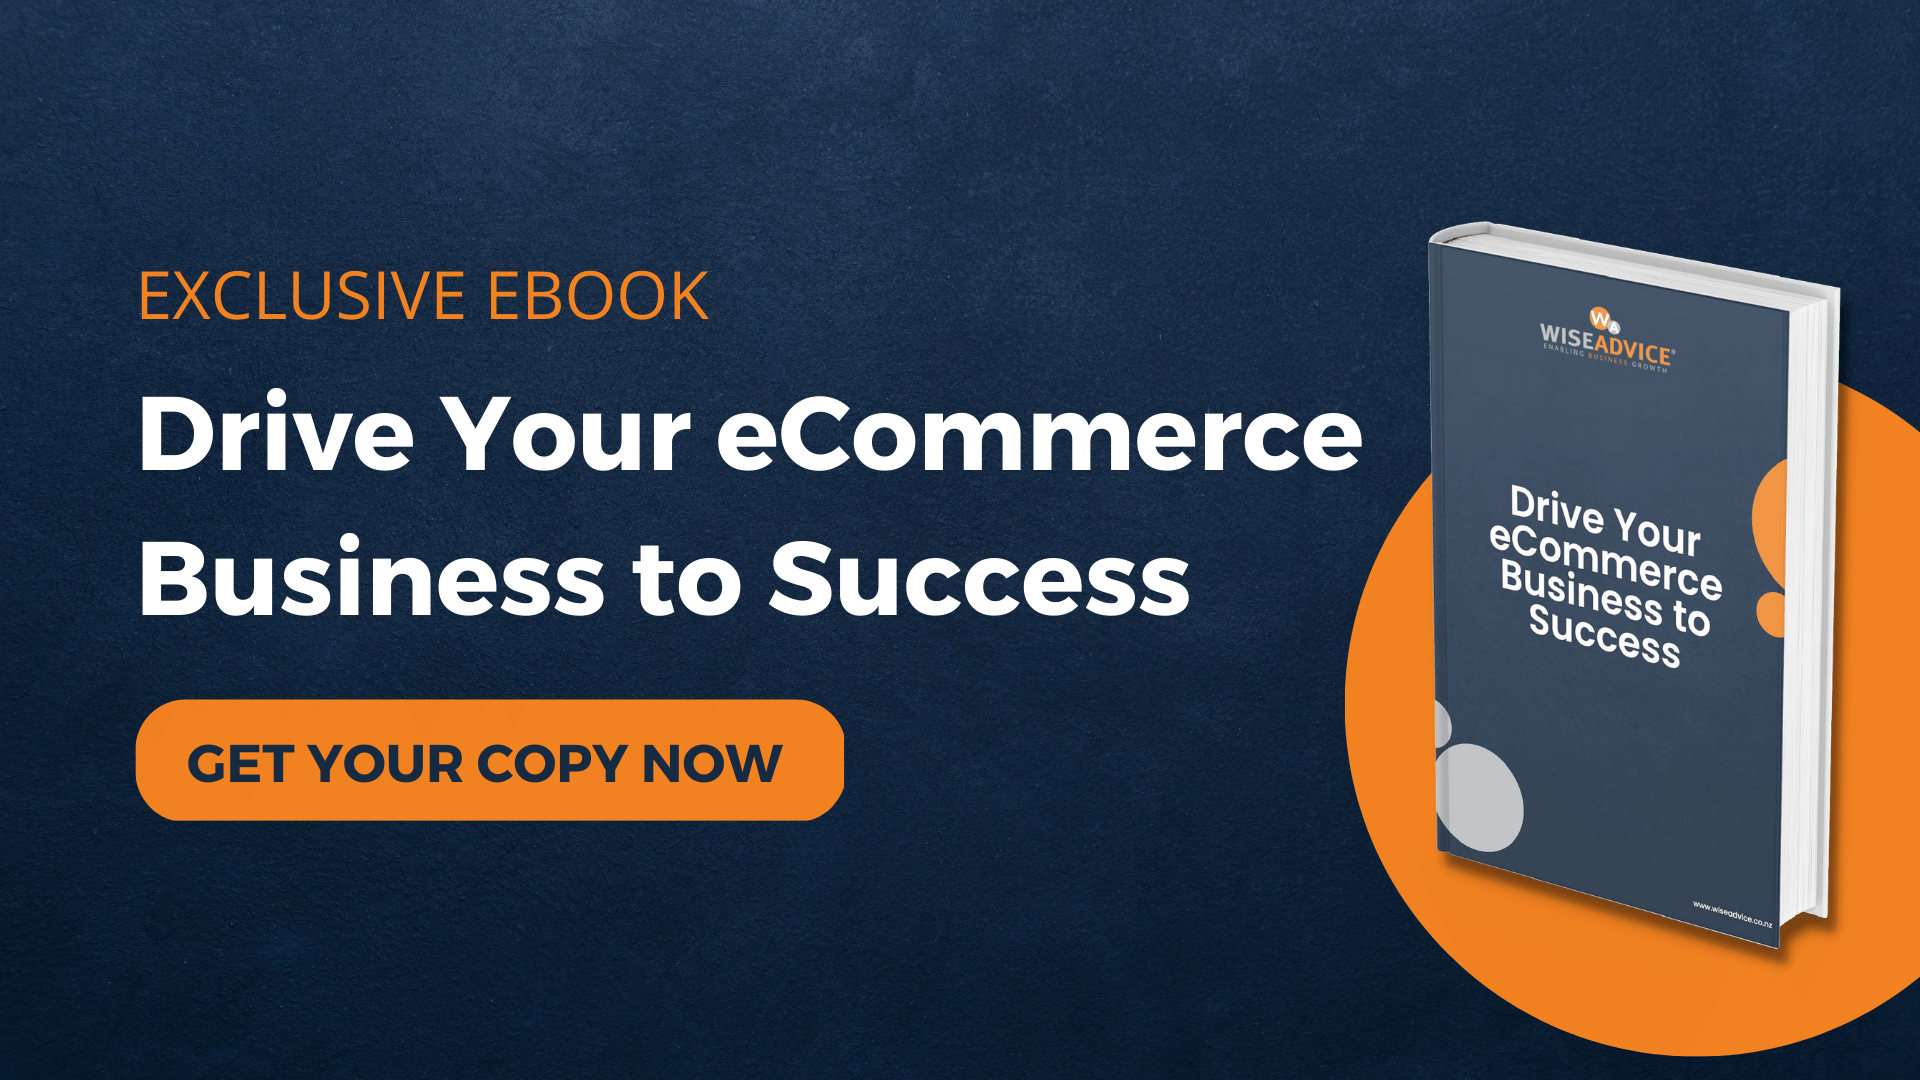 Wise Advice_Drive your ecommerce business to success 